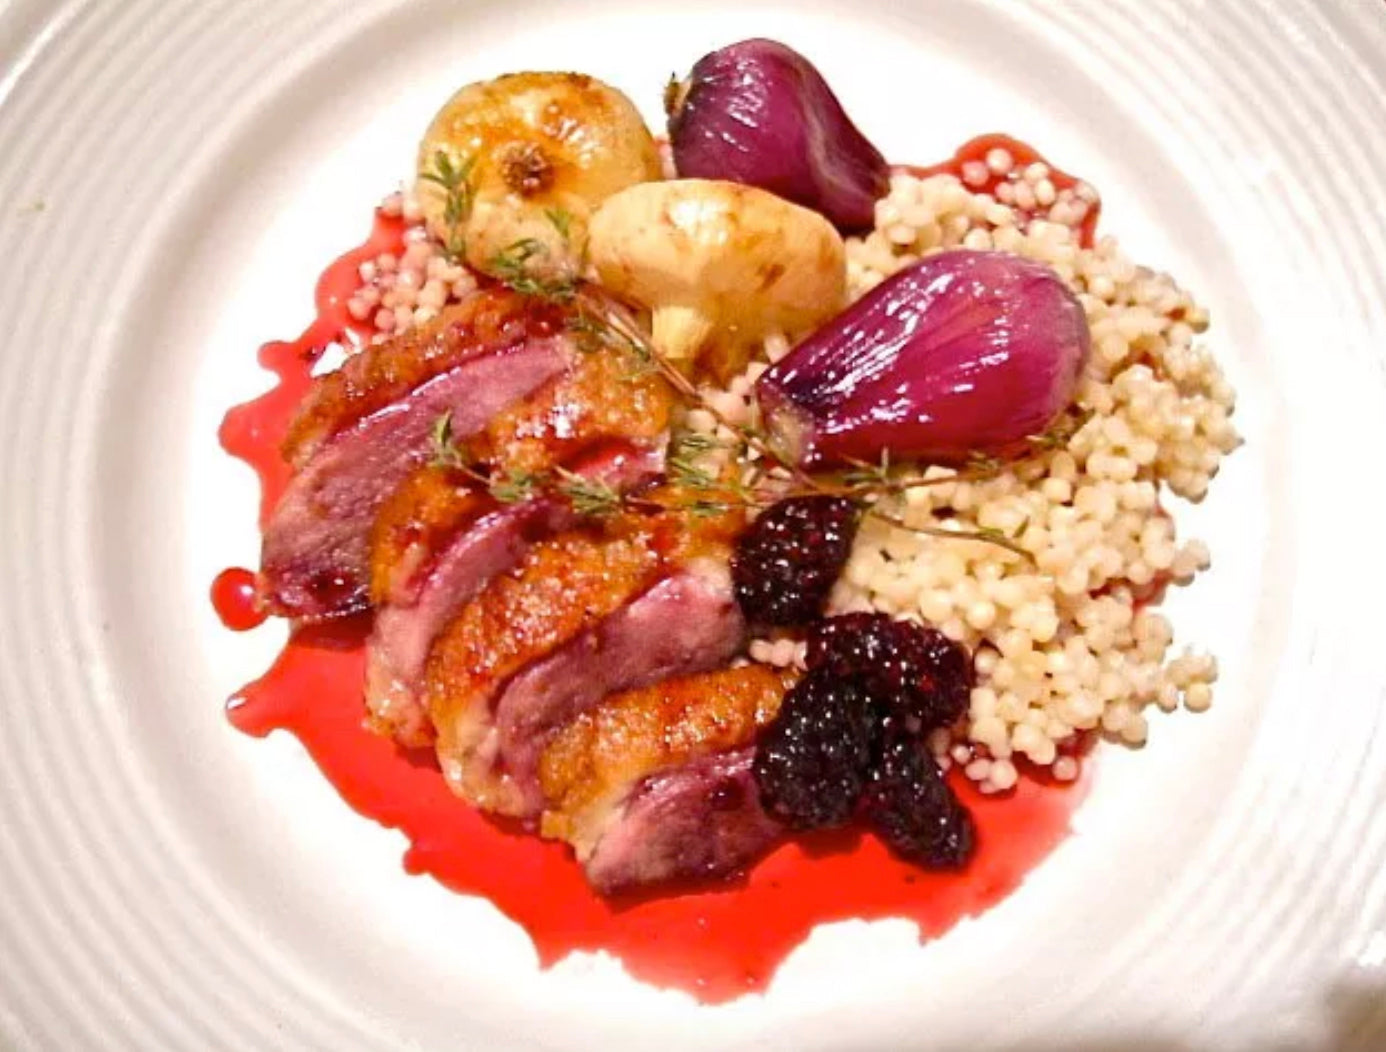 Crispy Duck with Blackberry Gastrique, Roasted Pearl Onions, and Israeli Cous-Cous Recipe